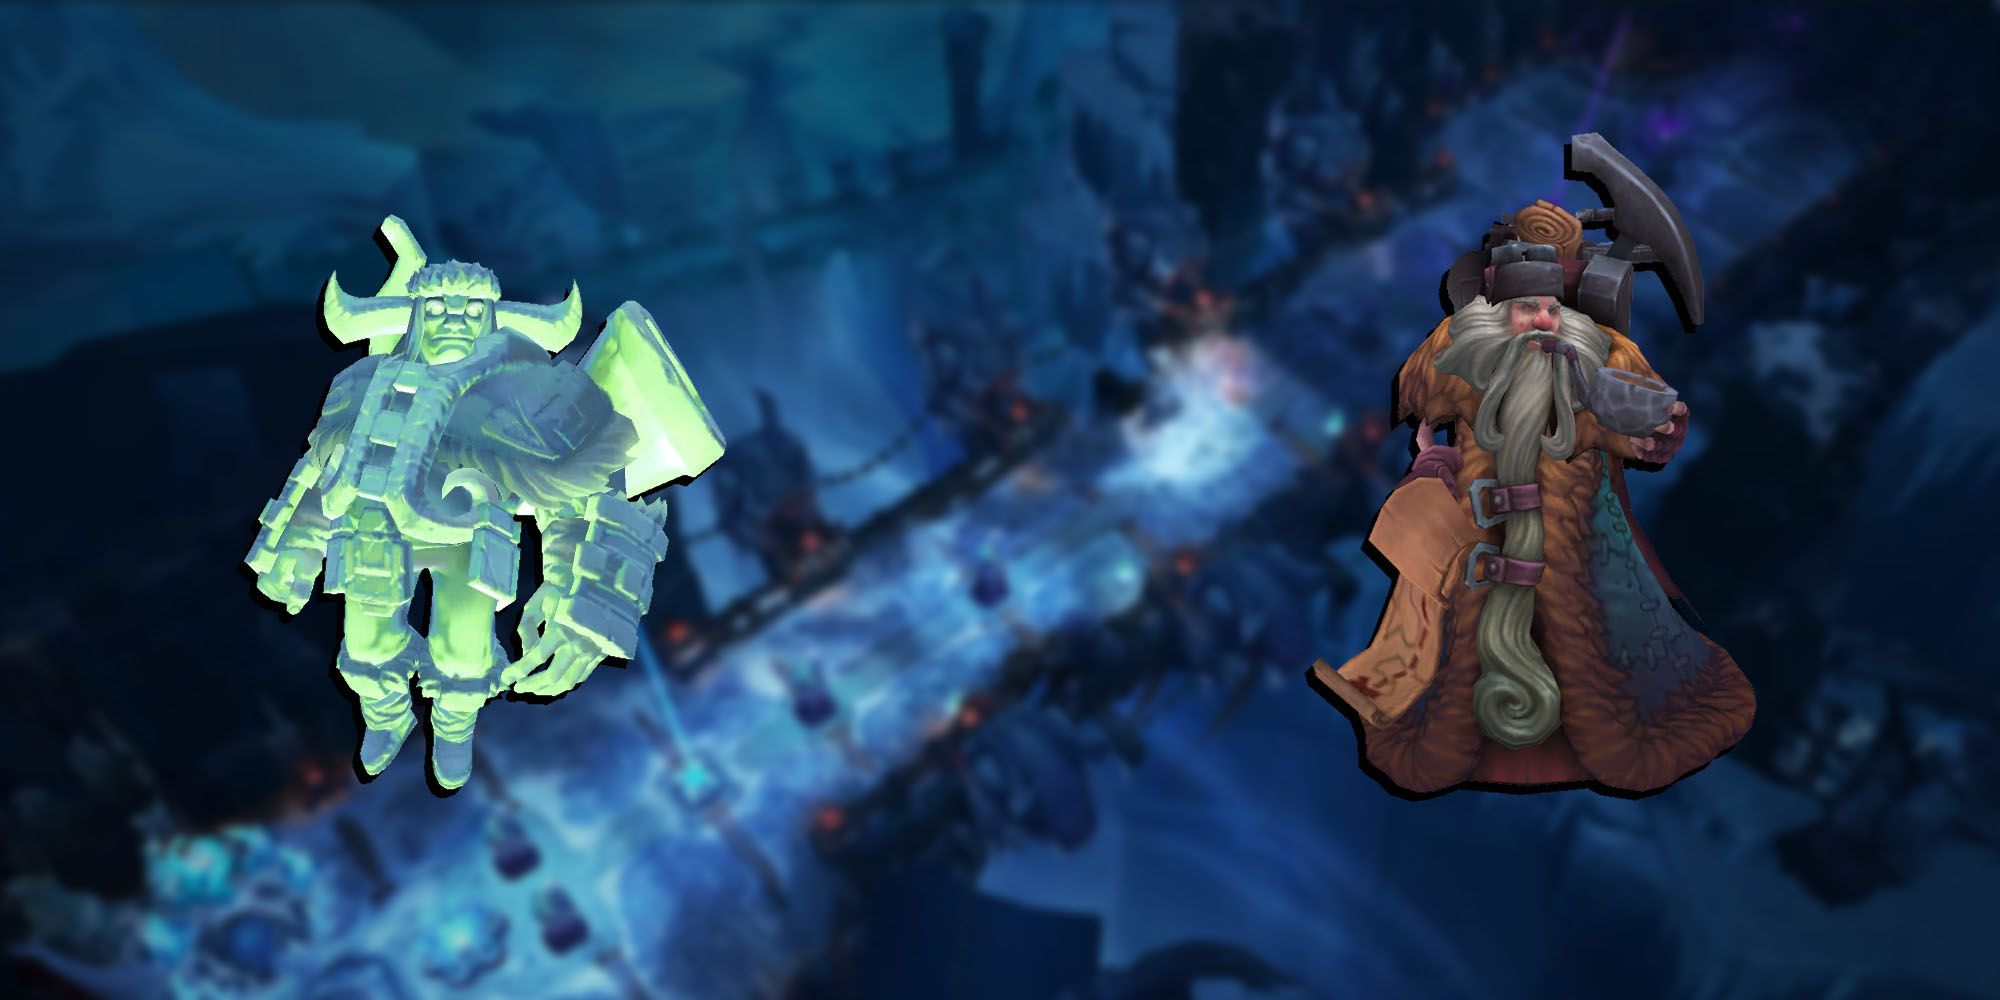 League Of Legends - Gregor And The Hermit Overlaid On Image Of Howling Abyss